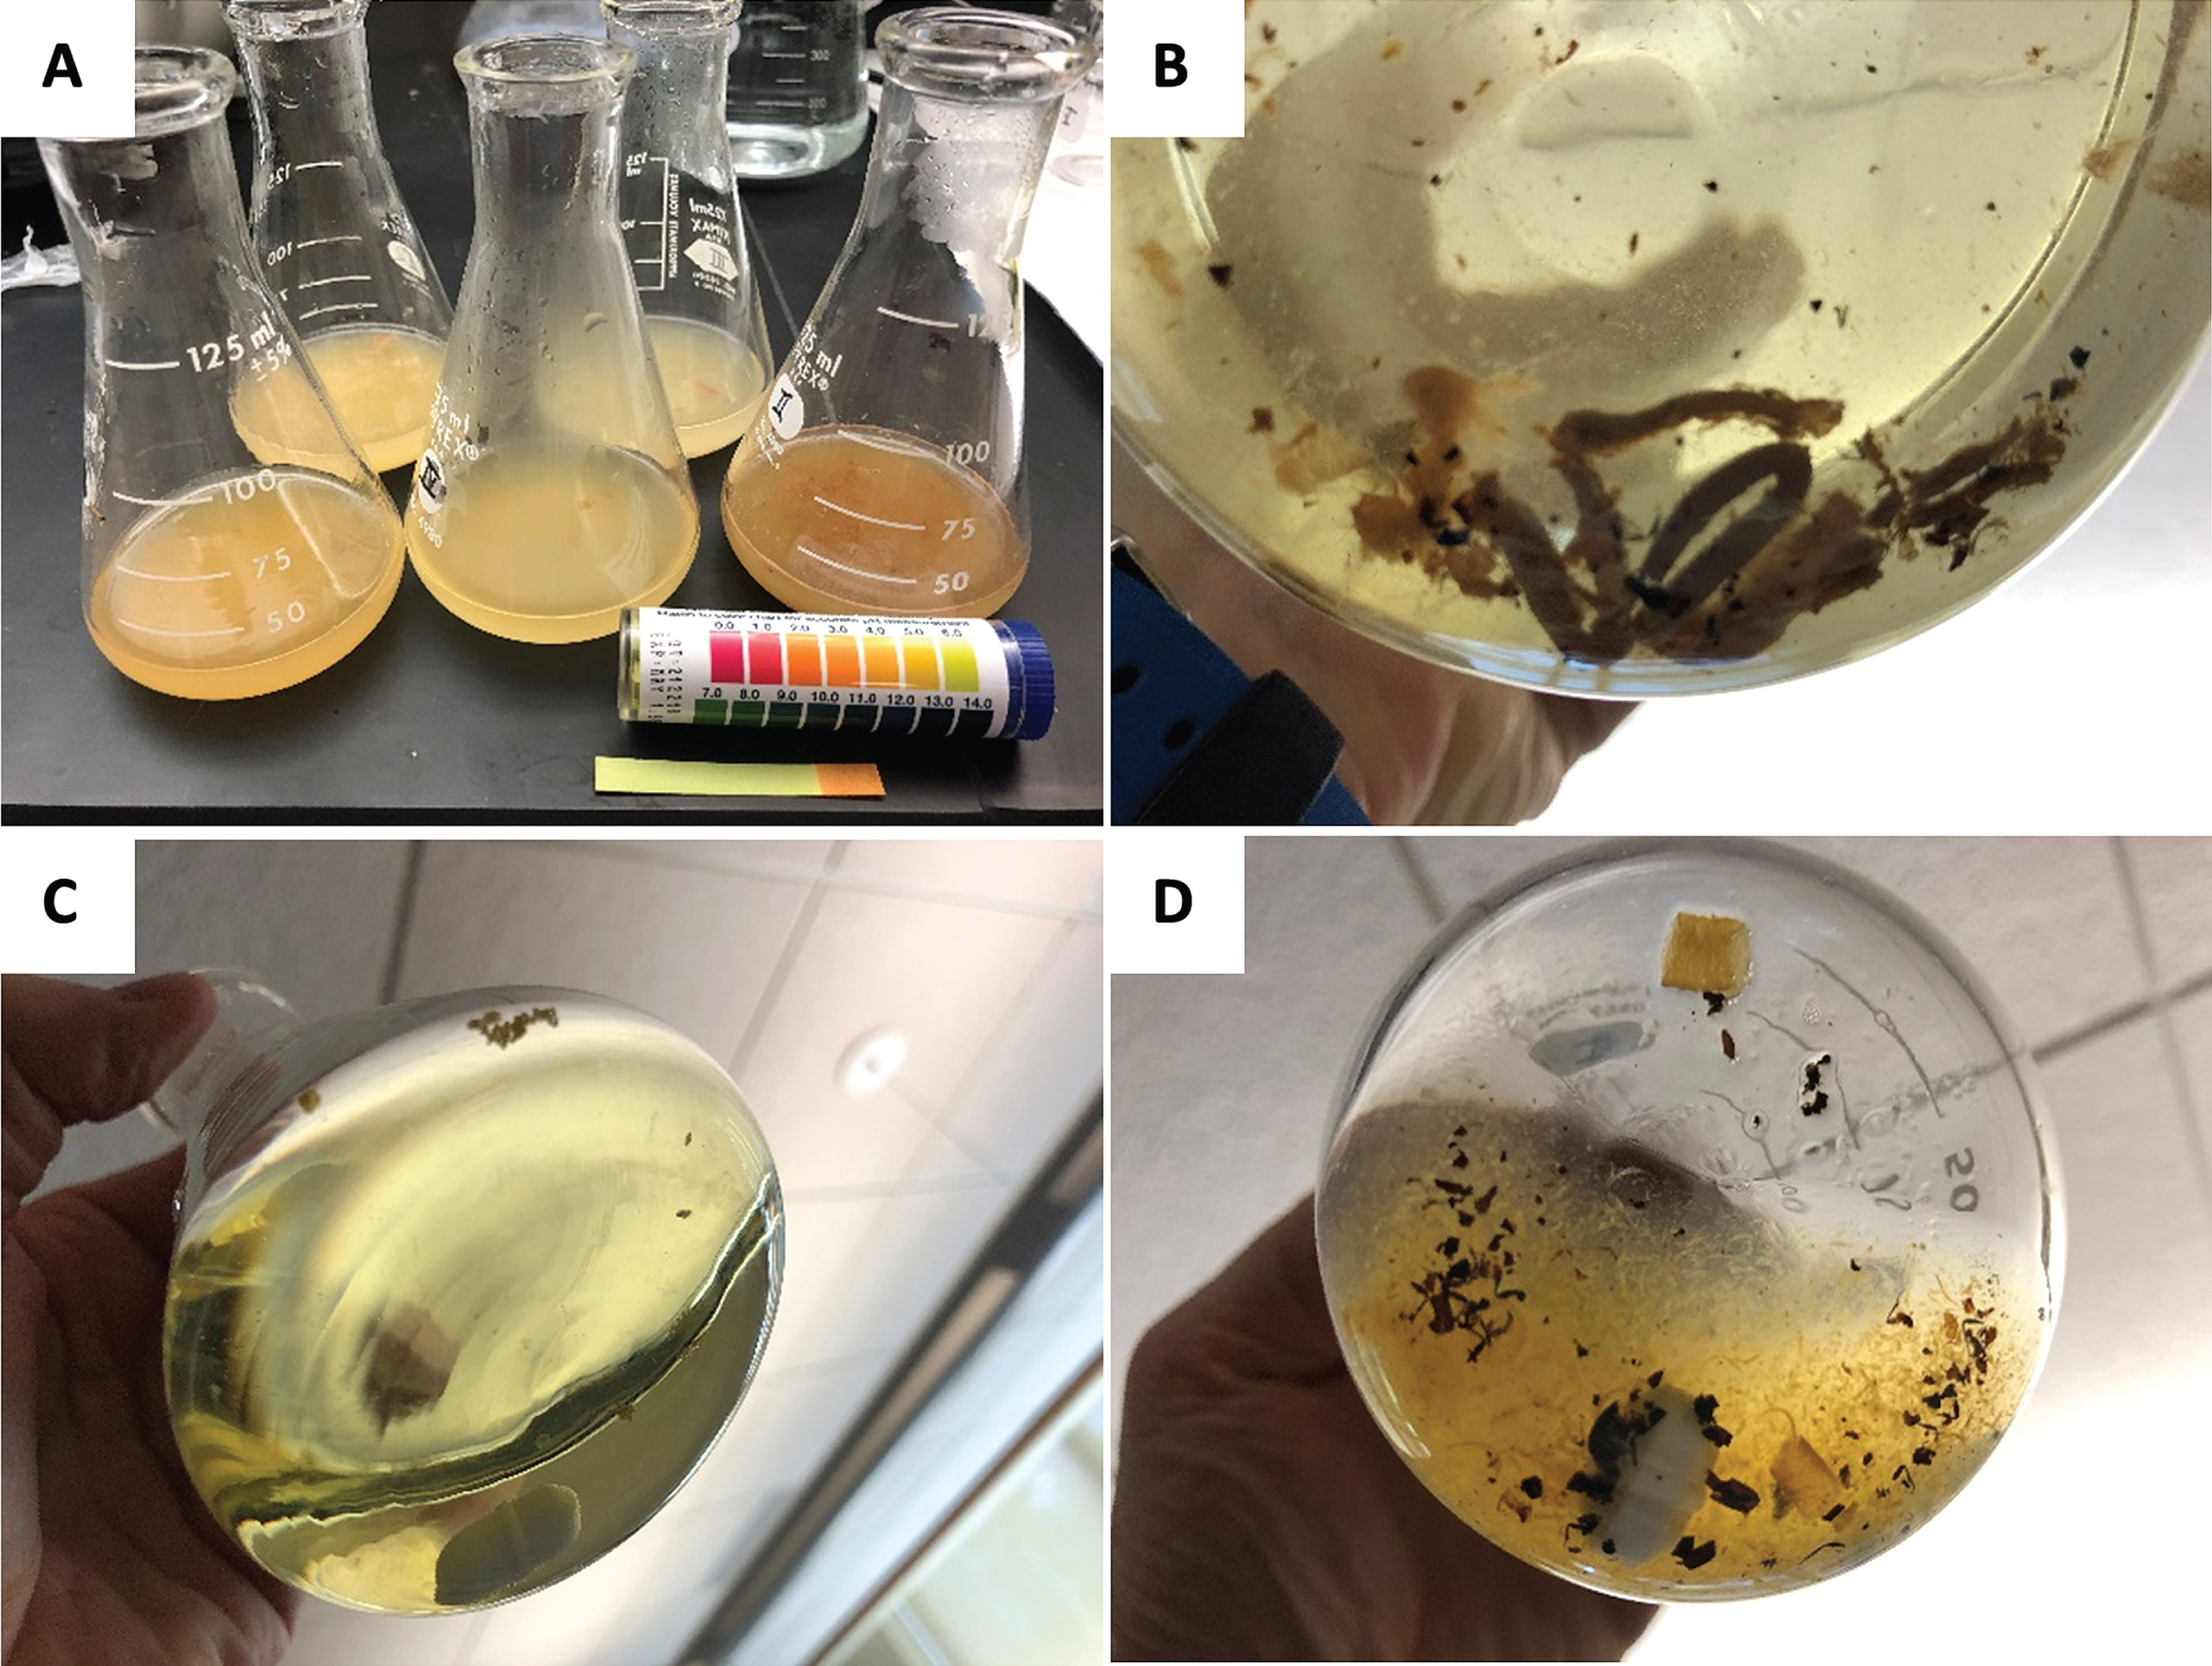 (A) Samples treated with KOH (pH 2). Intestines of Flathead Chub (B) after treatment with Fenton‘s reagents and of Striped Shiner (C) and Hog Sucker (D) after chemical digestion protocol. (D) shows undecomposed insect chitin parts.